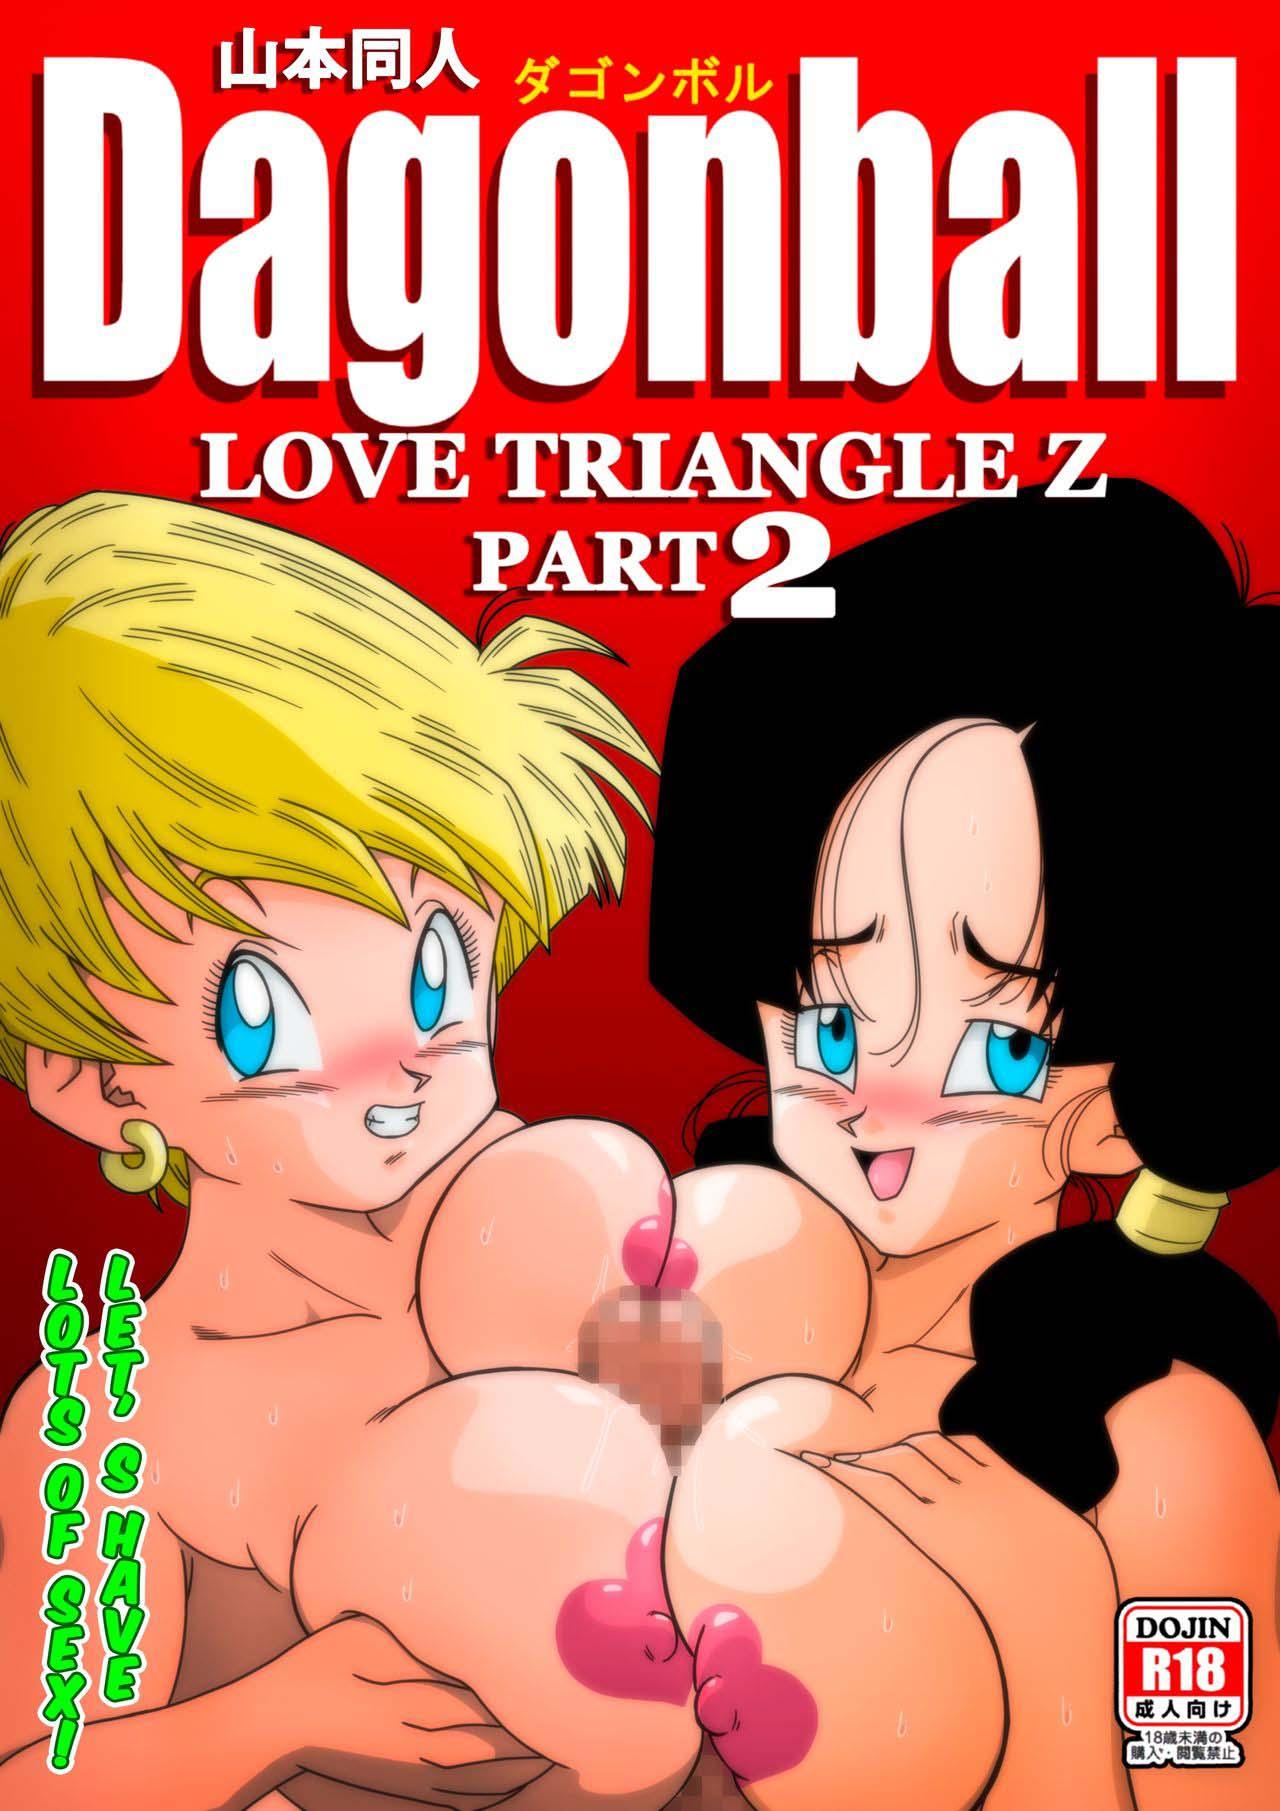 Bisex LOVE TRIANGLE Z Part 2 - Dragon ball z Glasses - Page 1